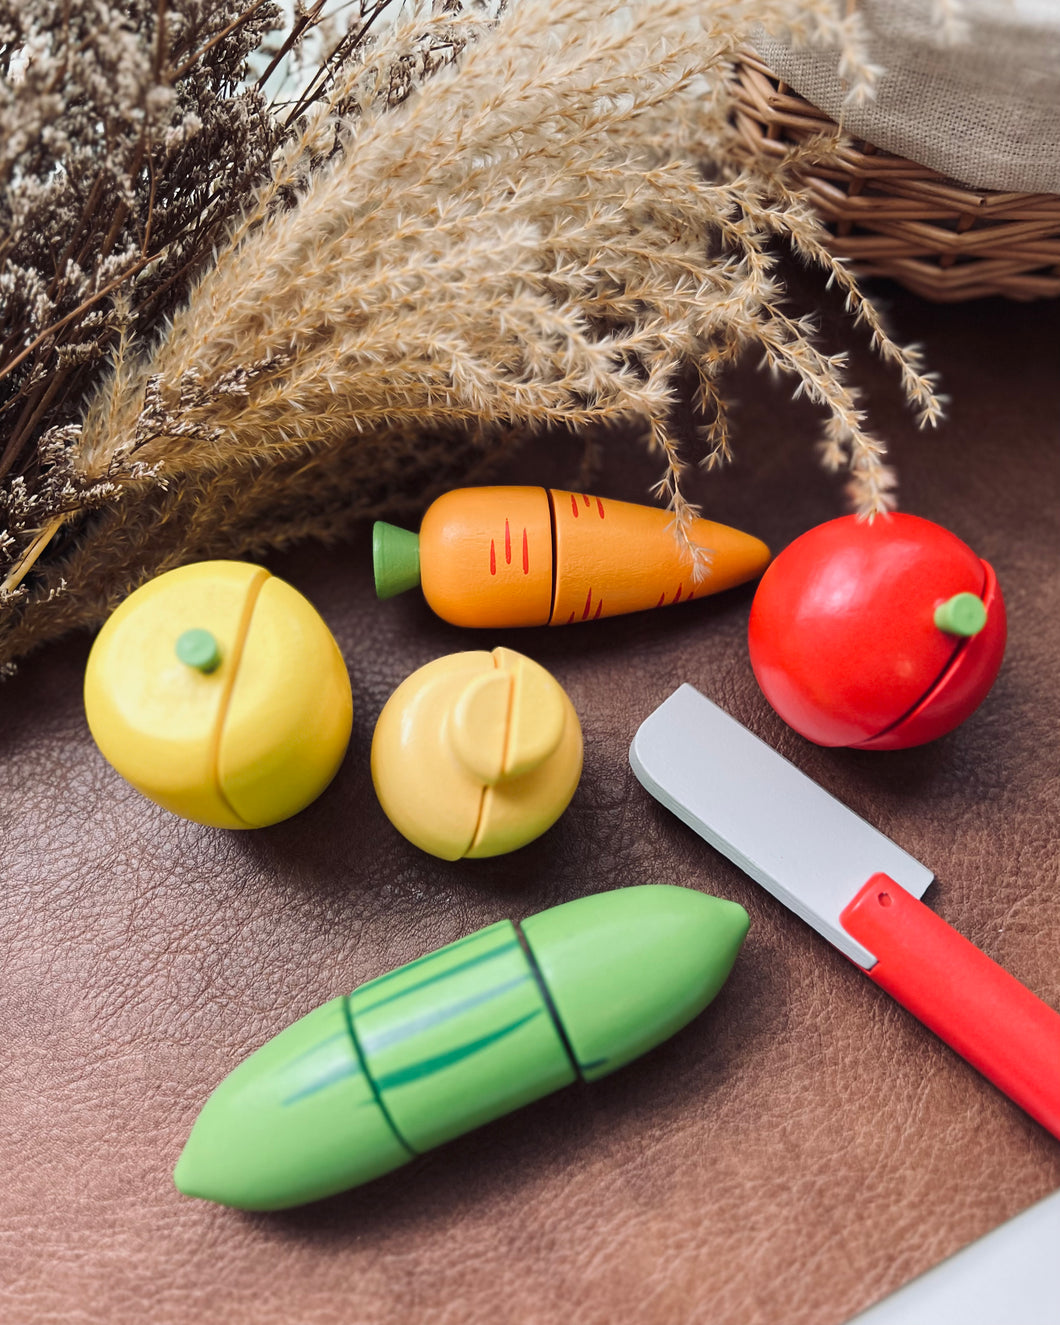 Mini Play Food Cutting Sets (Vegetables/ Fruits/Protein)